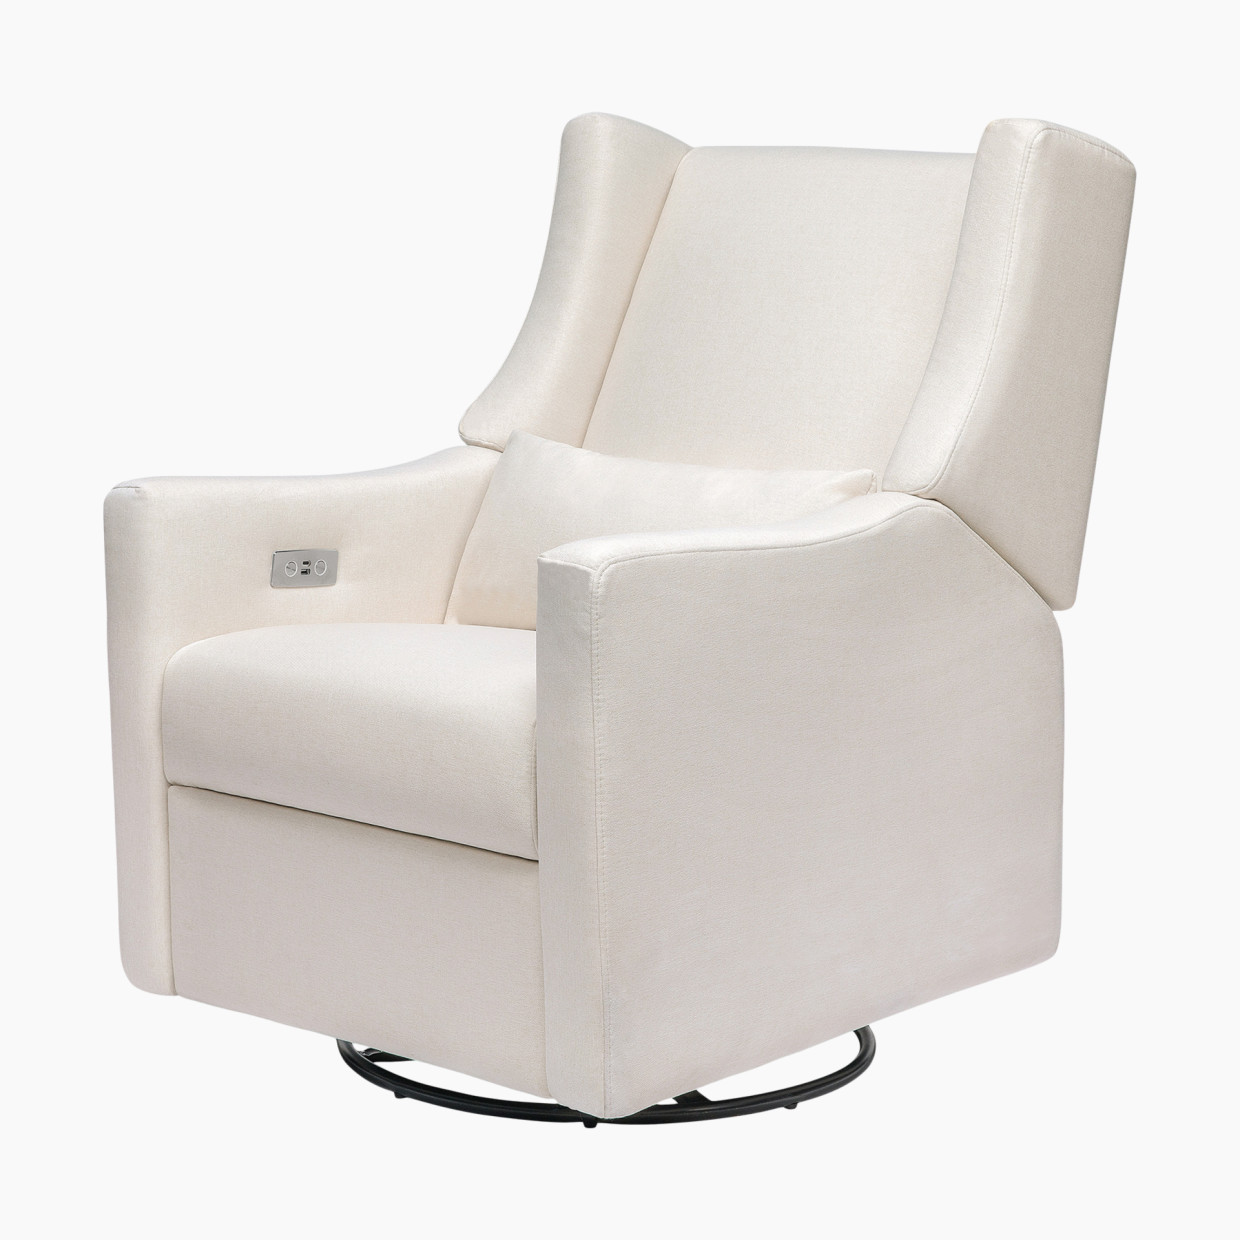 babyletto Kiwi Electronic Recliner and Swivel Glider - Performance Cream Eco Weave.